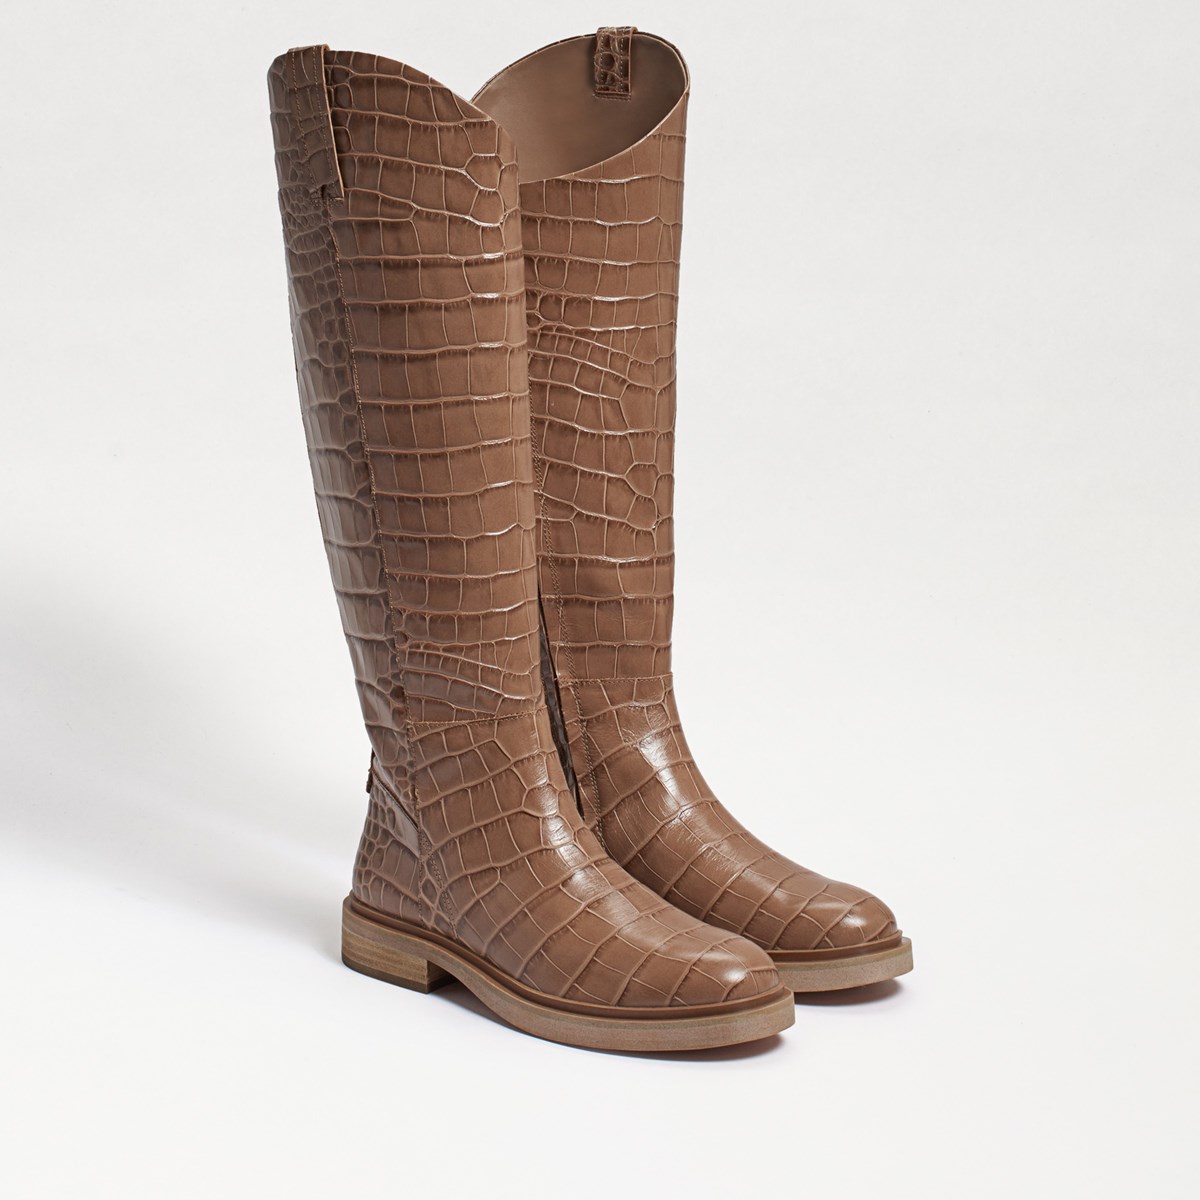 Fable Tall Boot - Pair